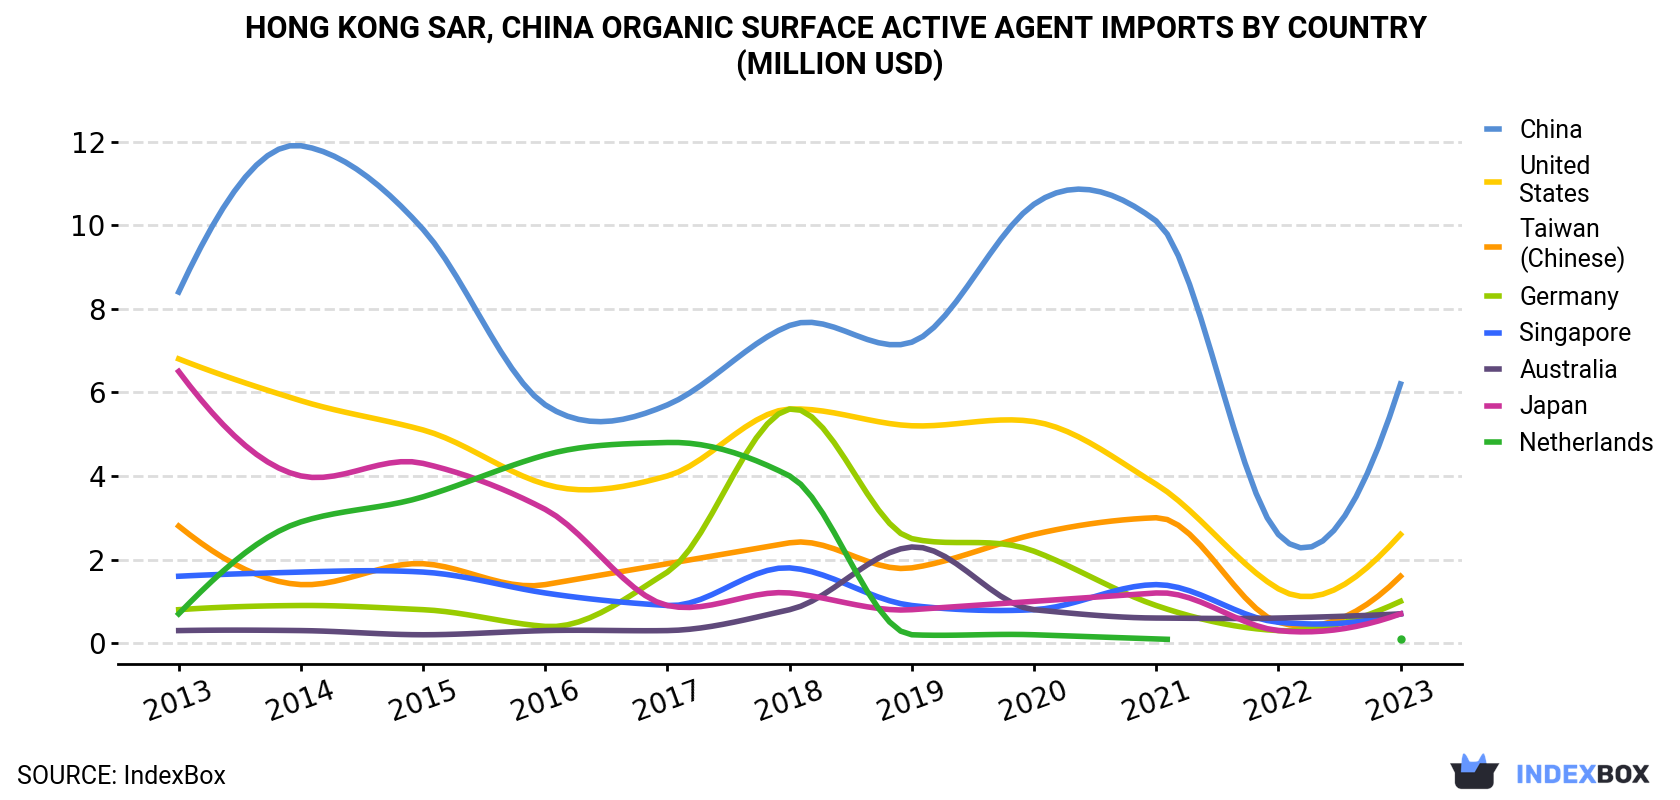 Hong Kong Organic Surface Active Agent Imports By Country (Million USD)